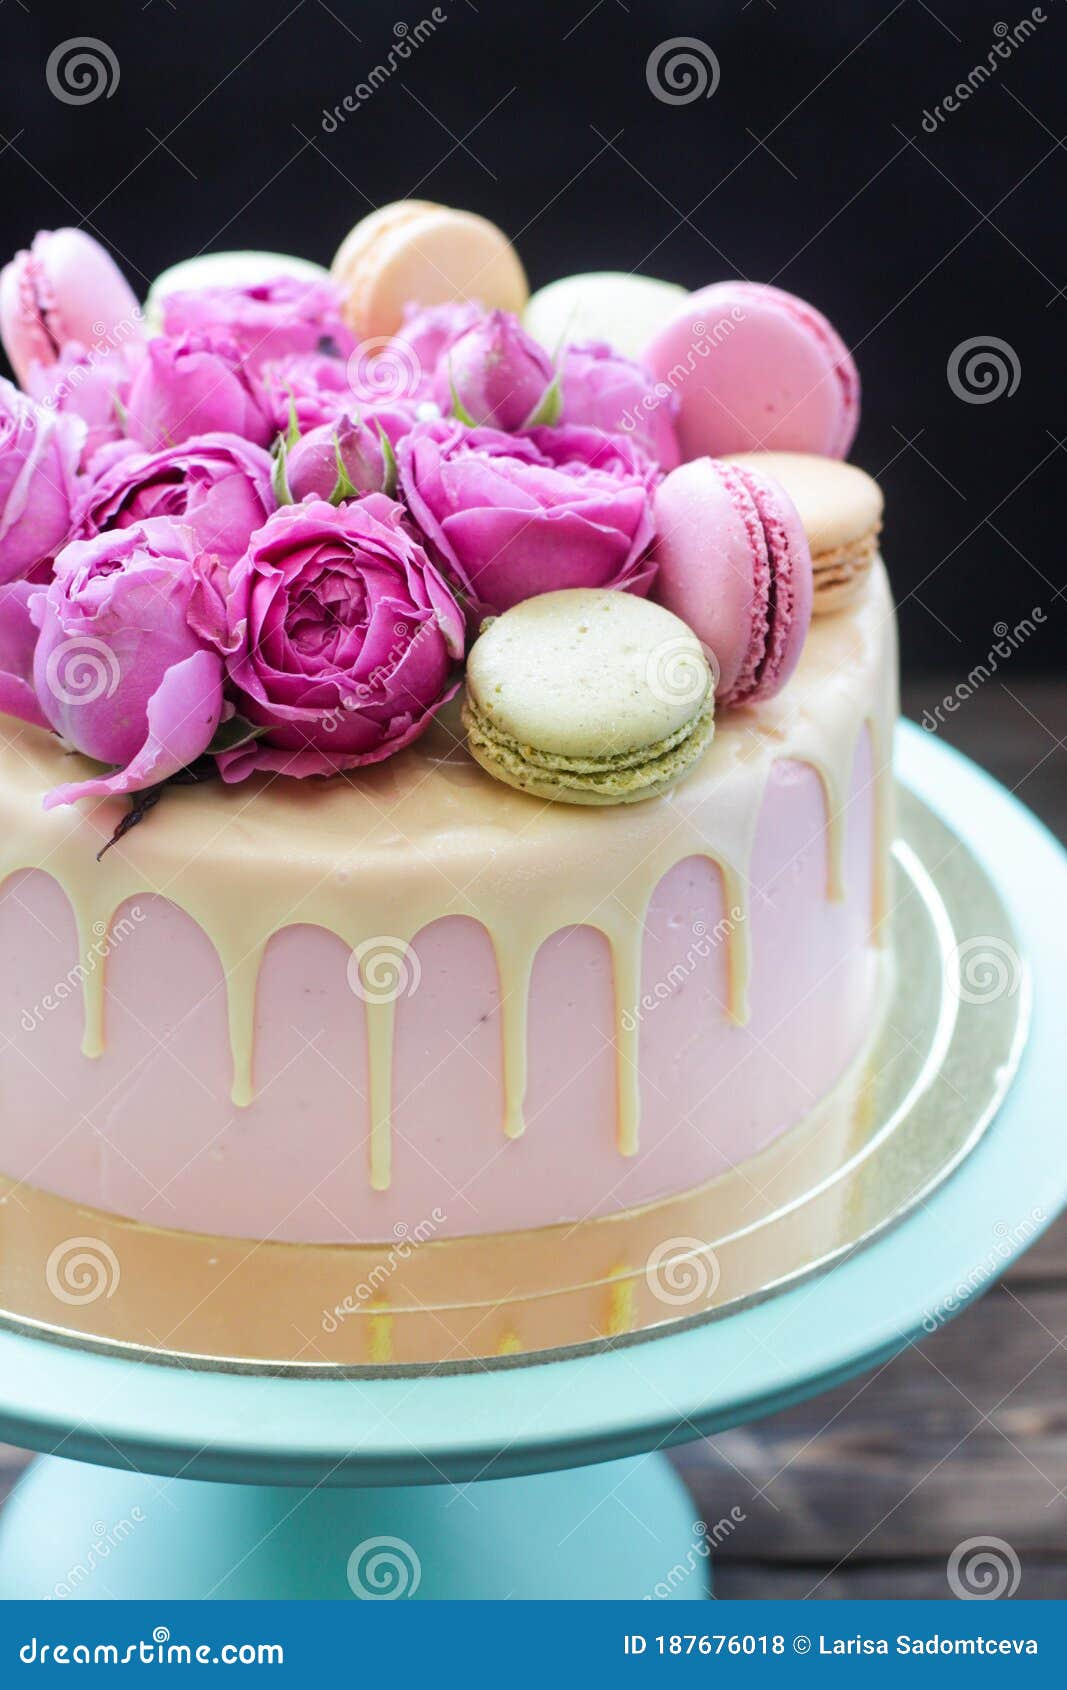 Pin on Birthday Cake Pictures